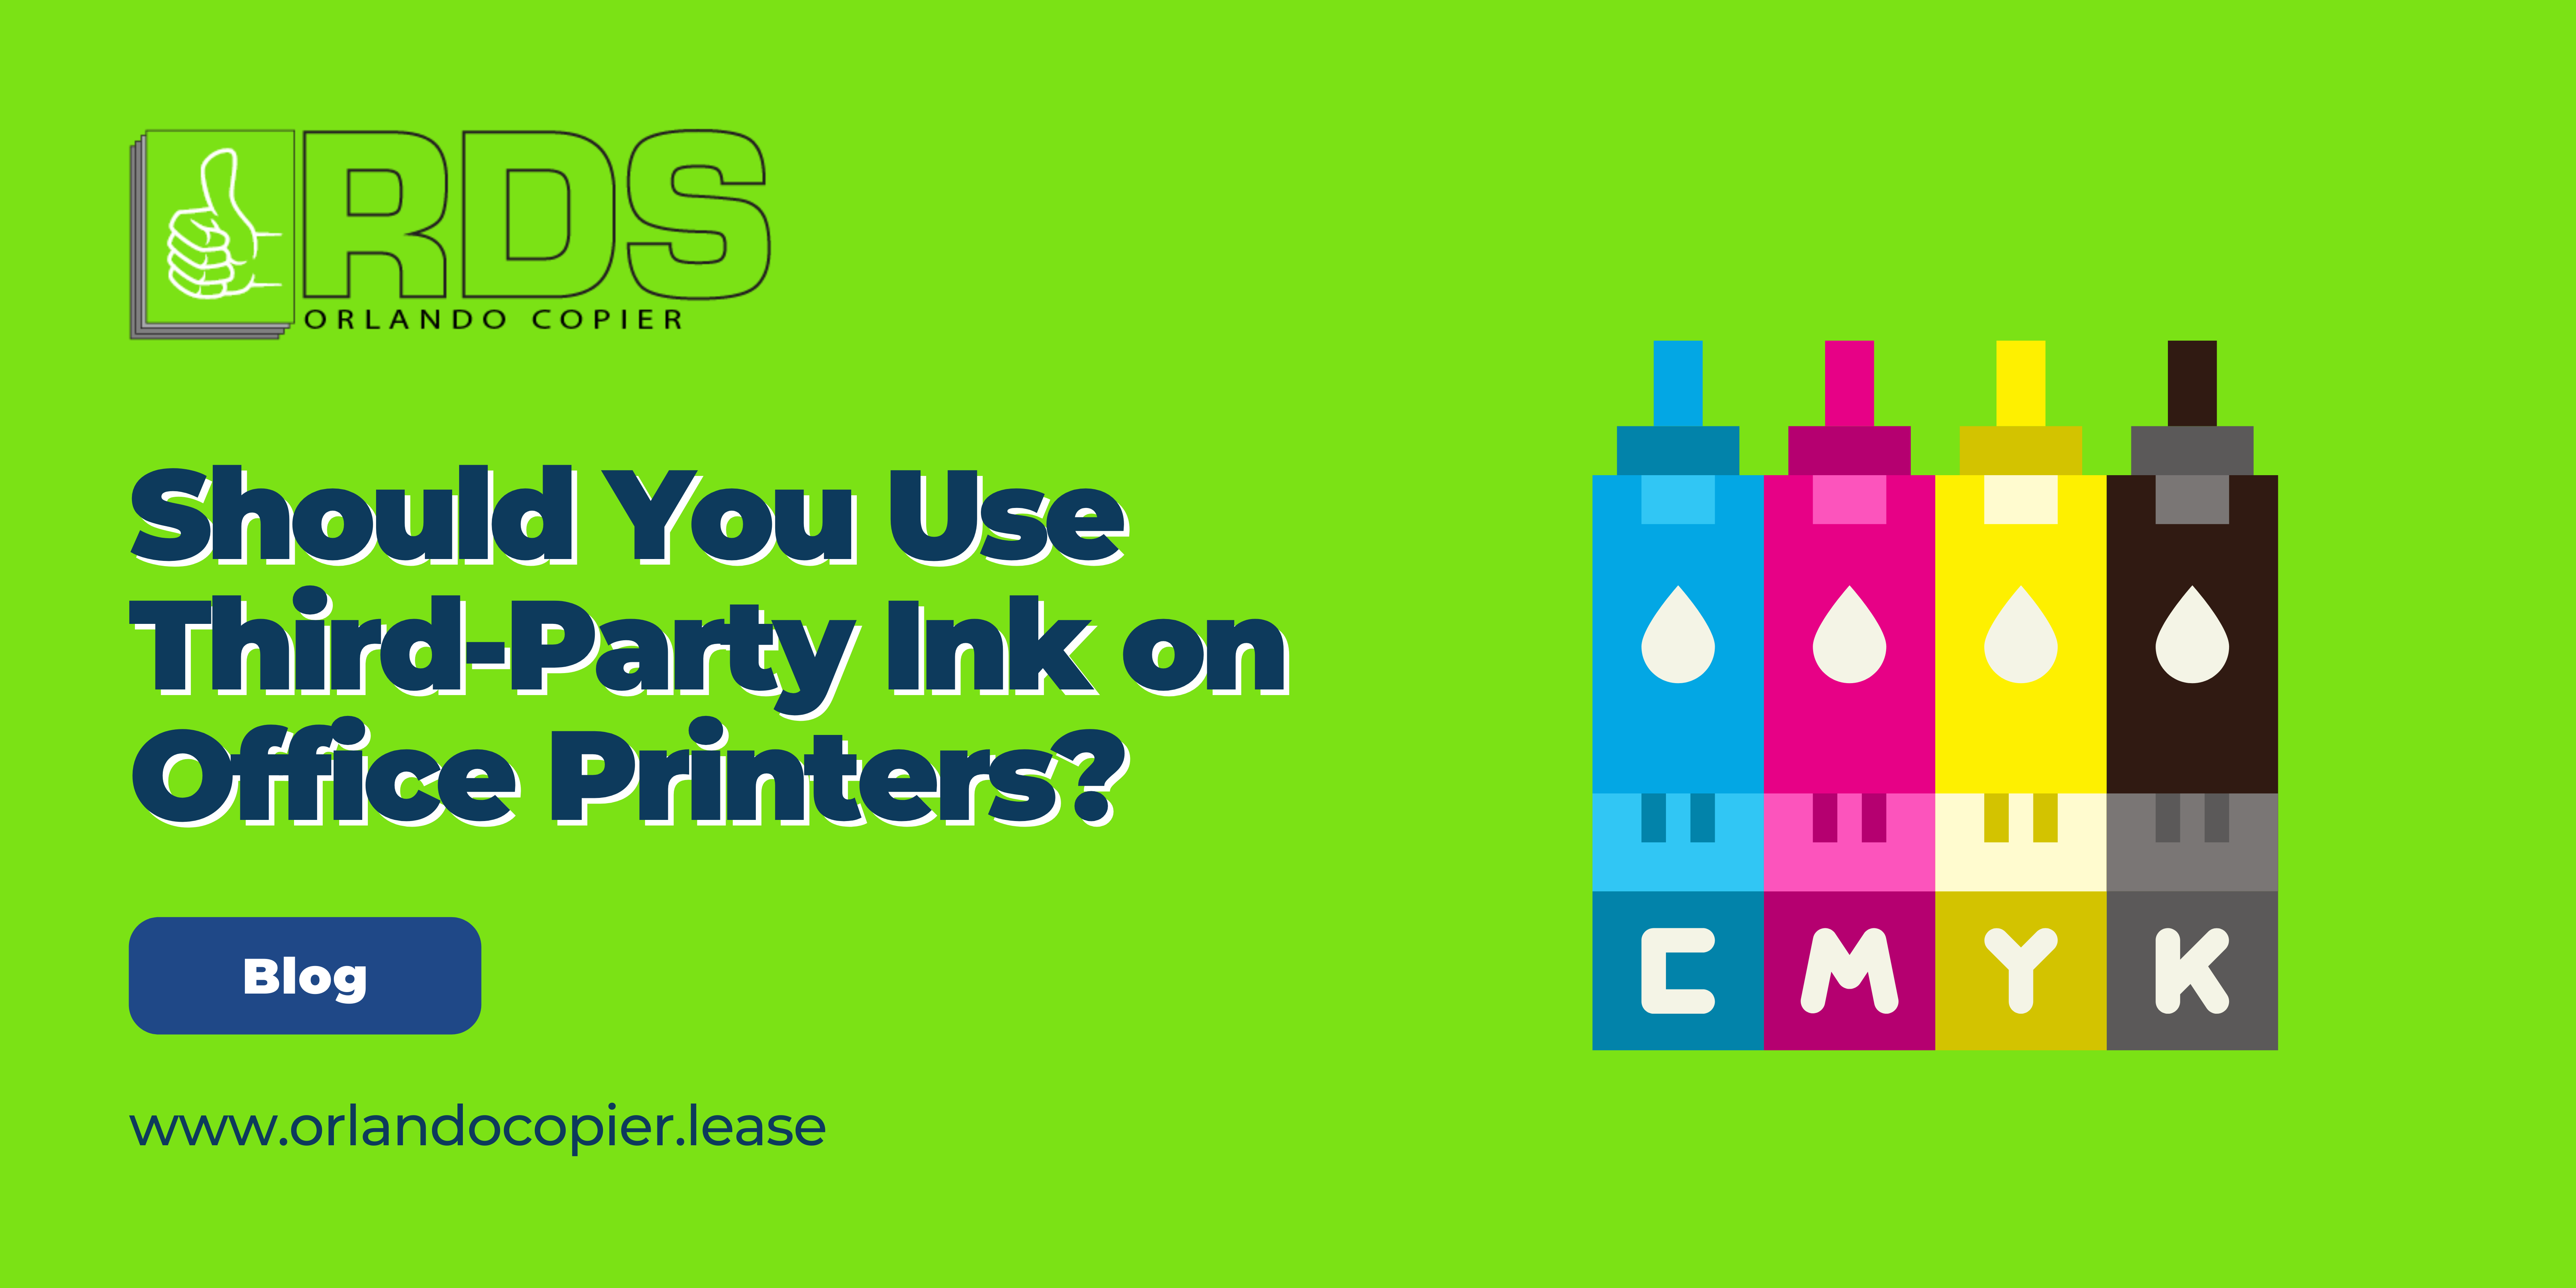 Should You Use Third-Party Ink on Office Printers?